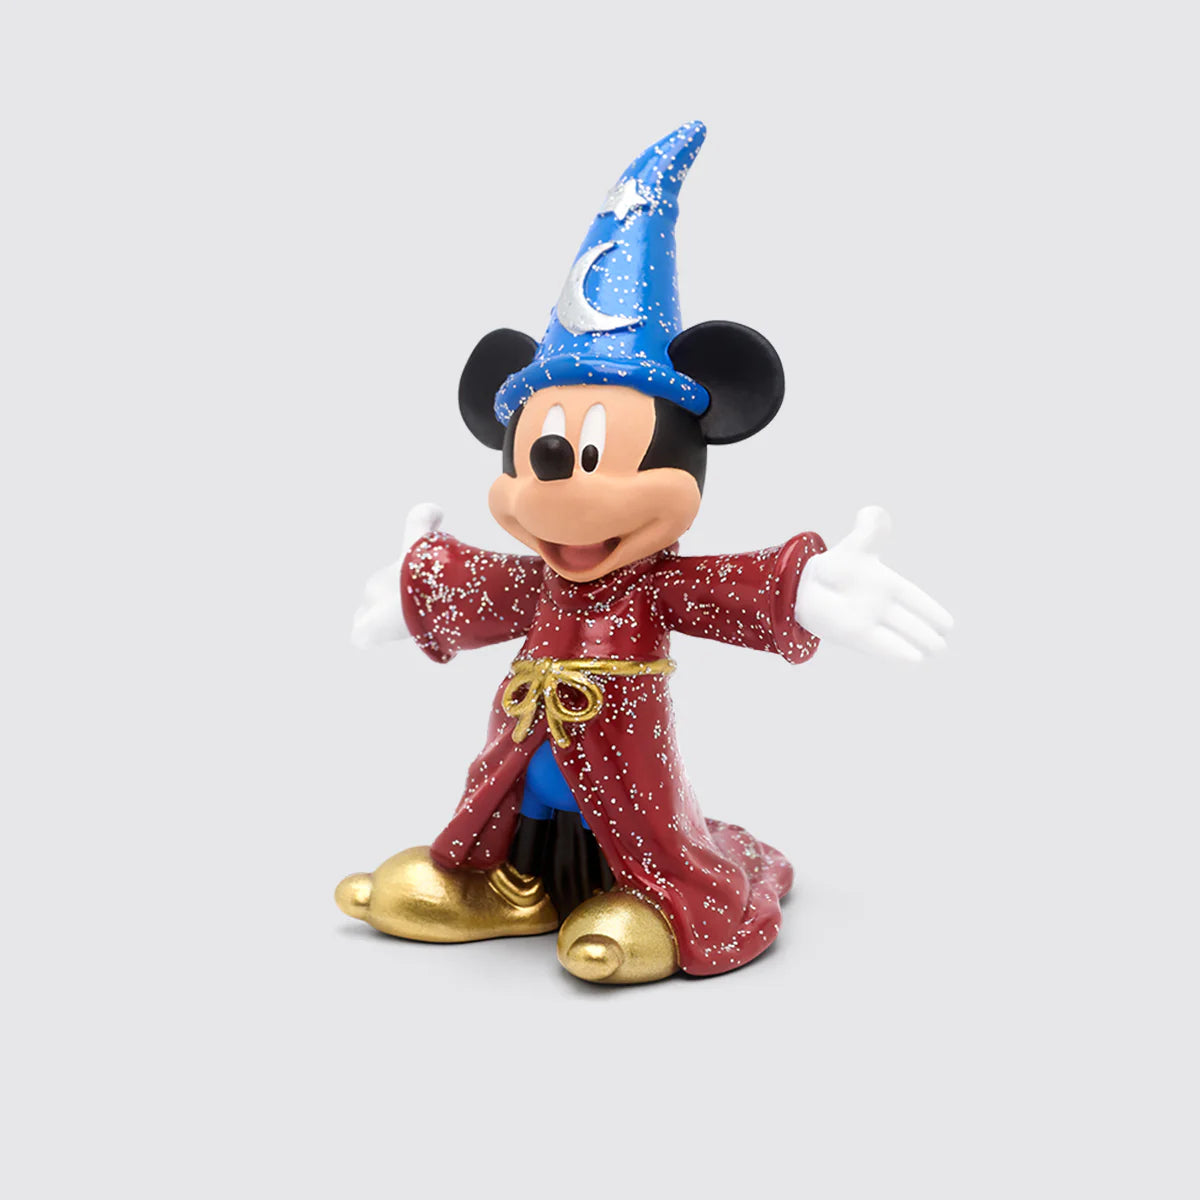 Tonies-Tonies Character - Mickey Mouse Fantasia-10000934-Legacy Toys